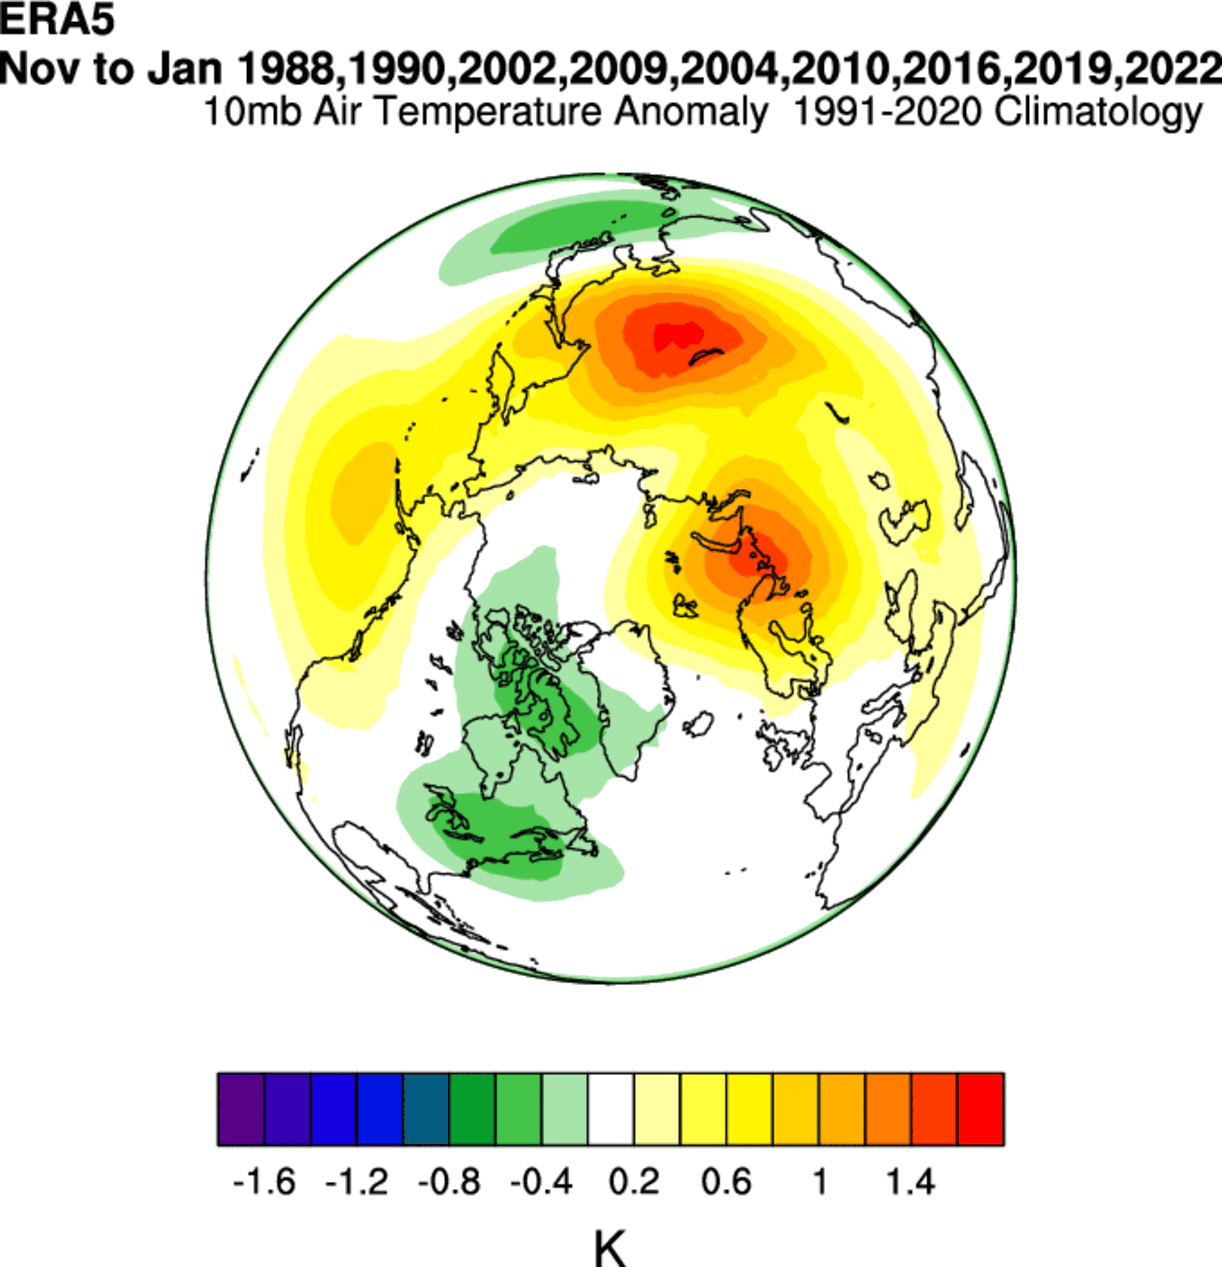 stratospheric-polar-vortex-cooling-anomaly-weather-winter-influence-temperature-map